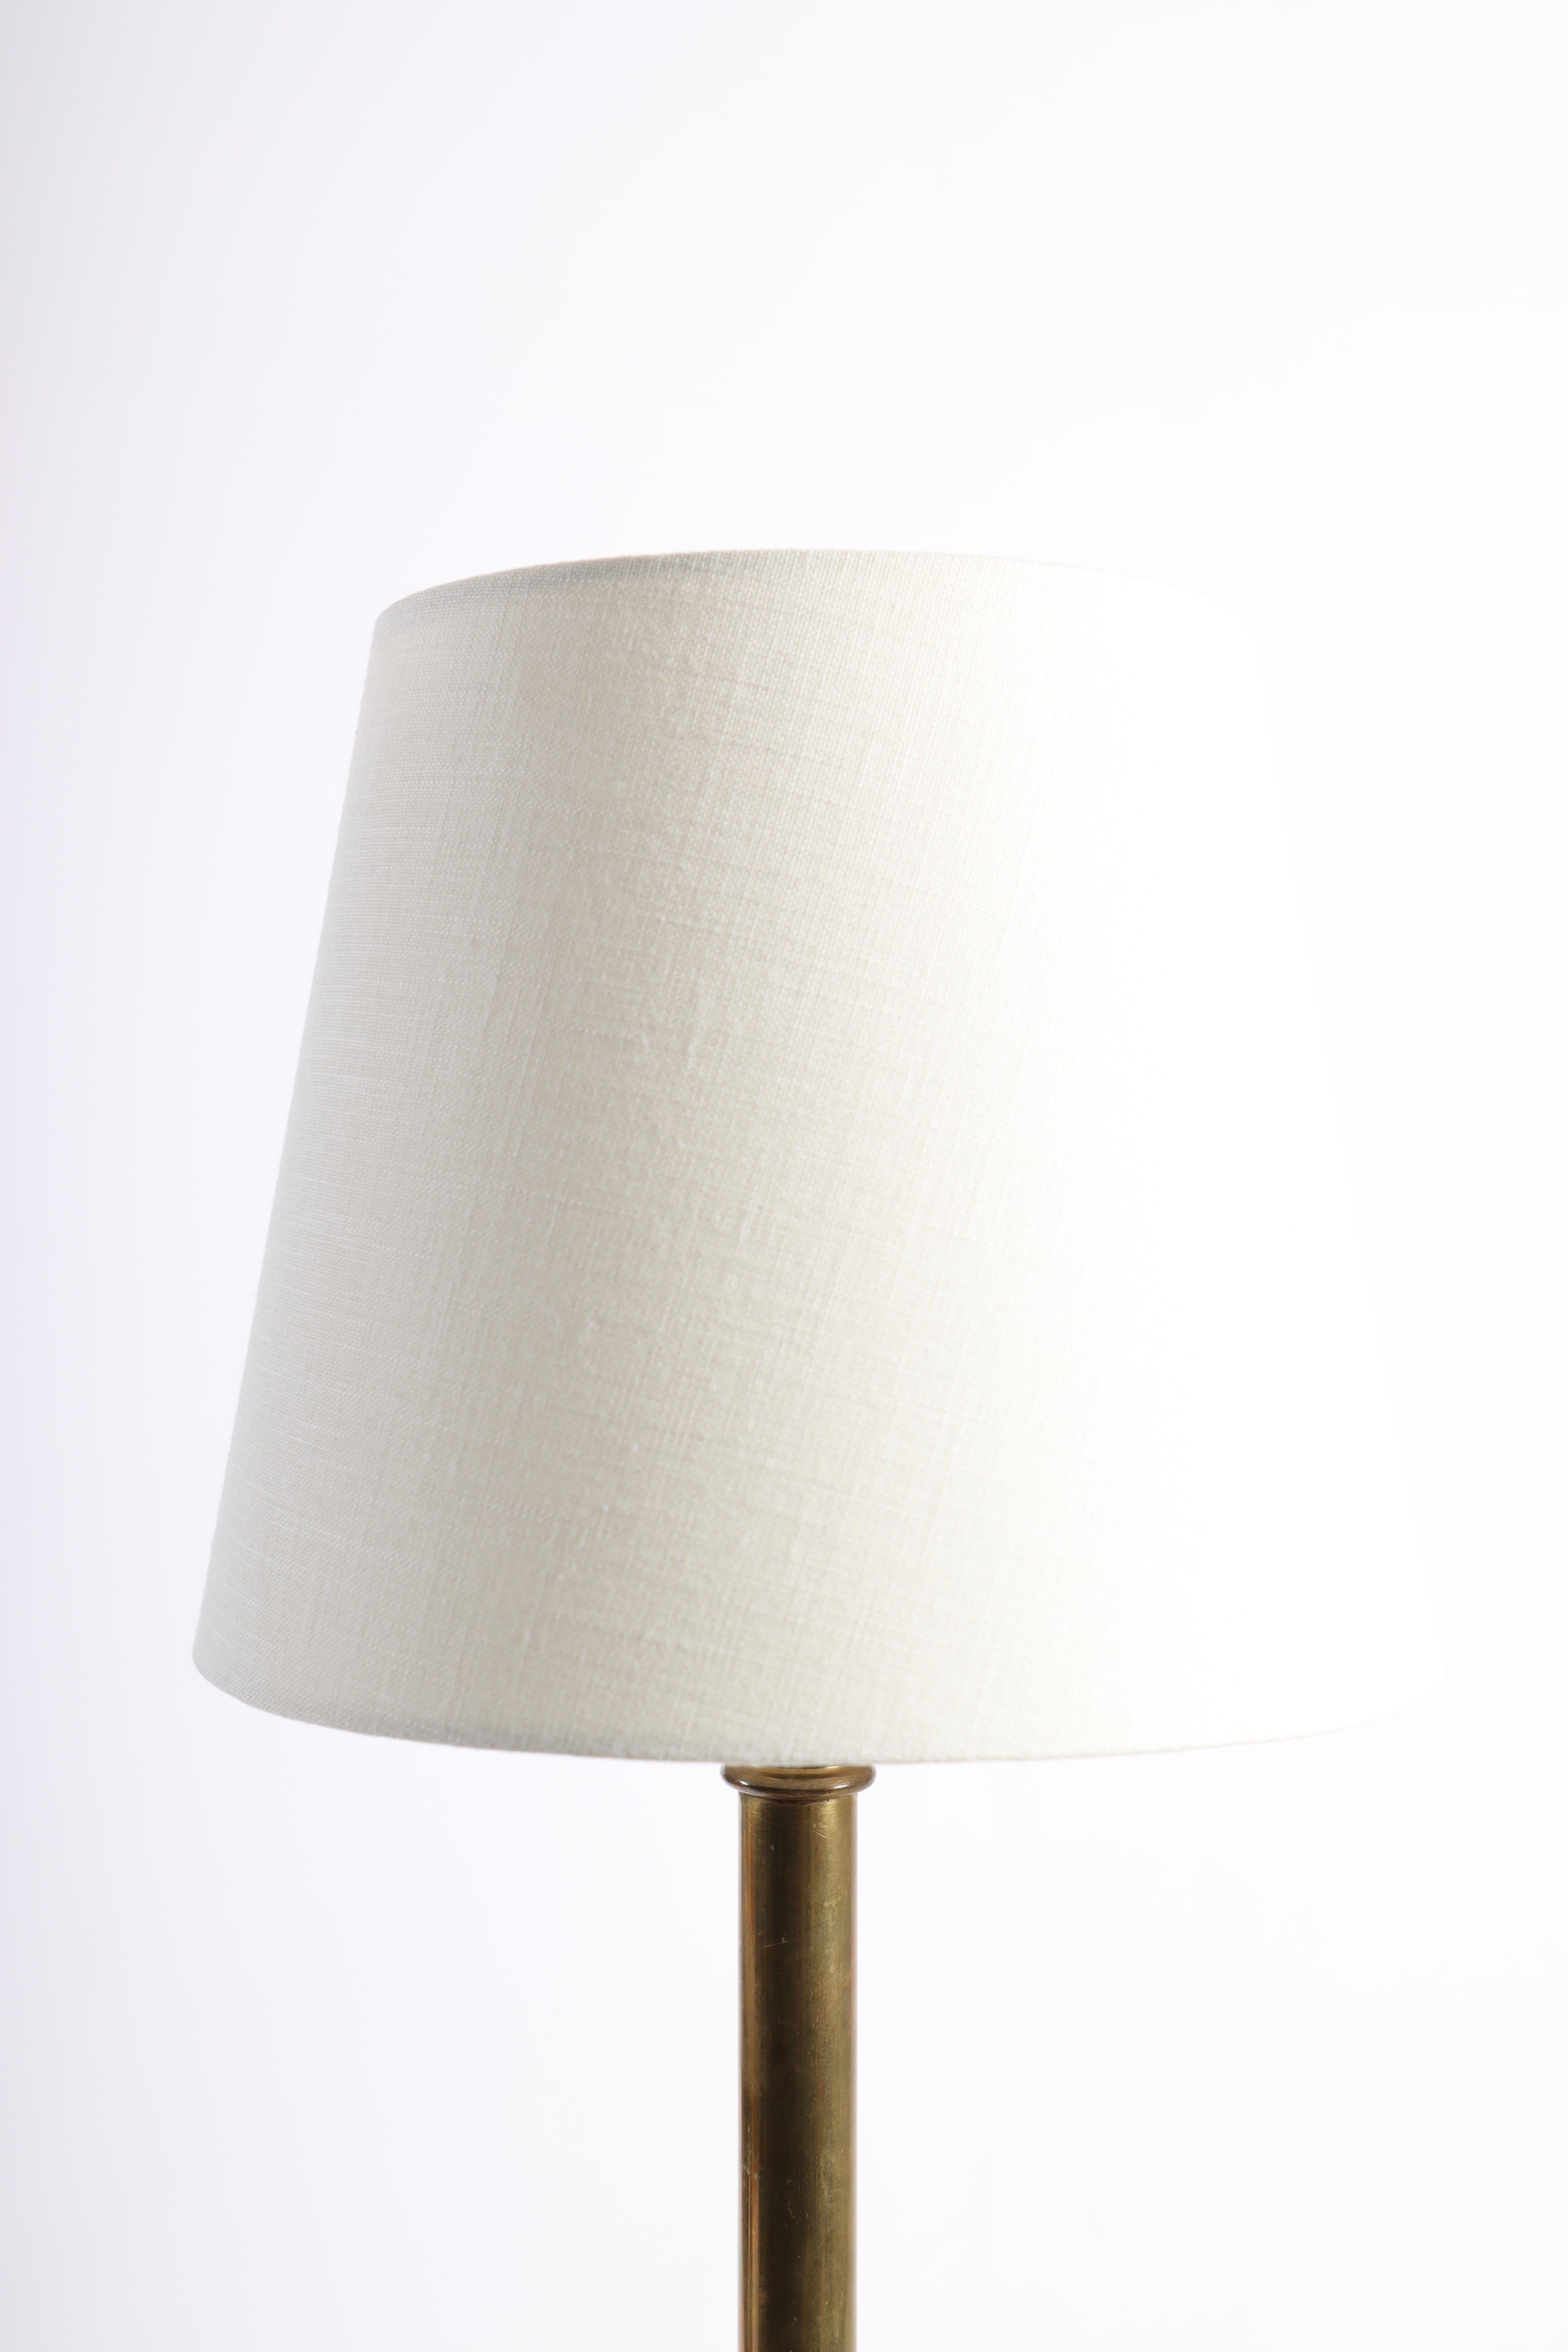 Fabric Table Lamp in Brass by Fog & Mørup 1930s For Sale